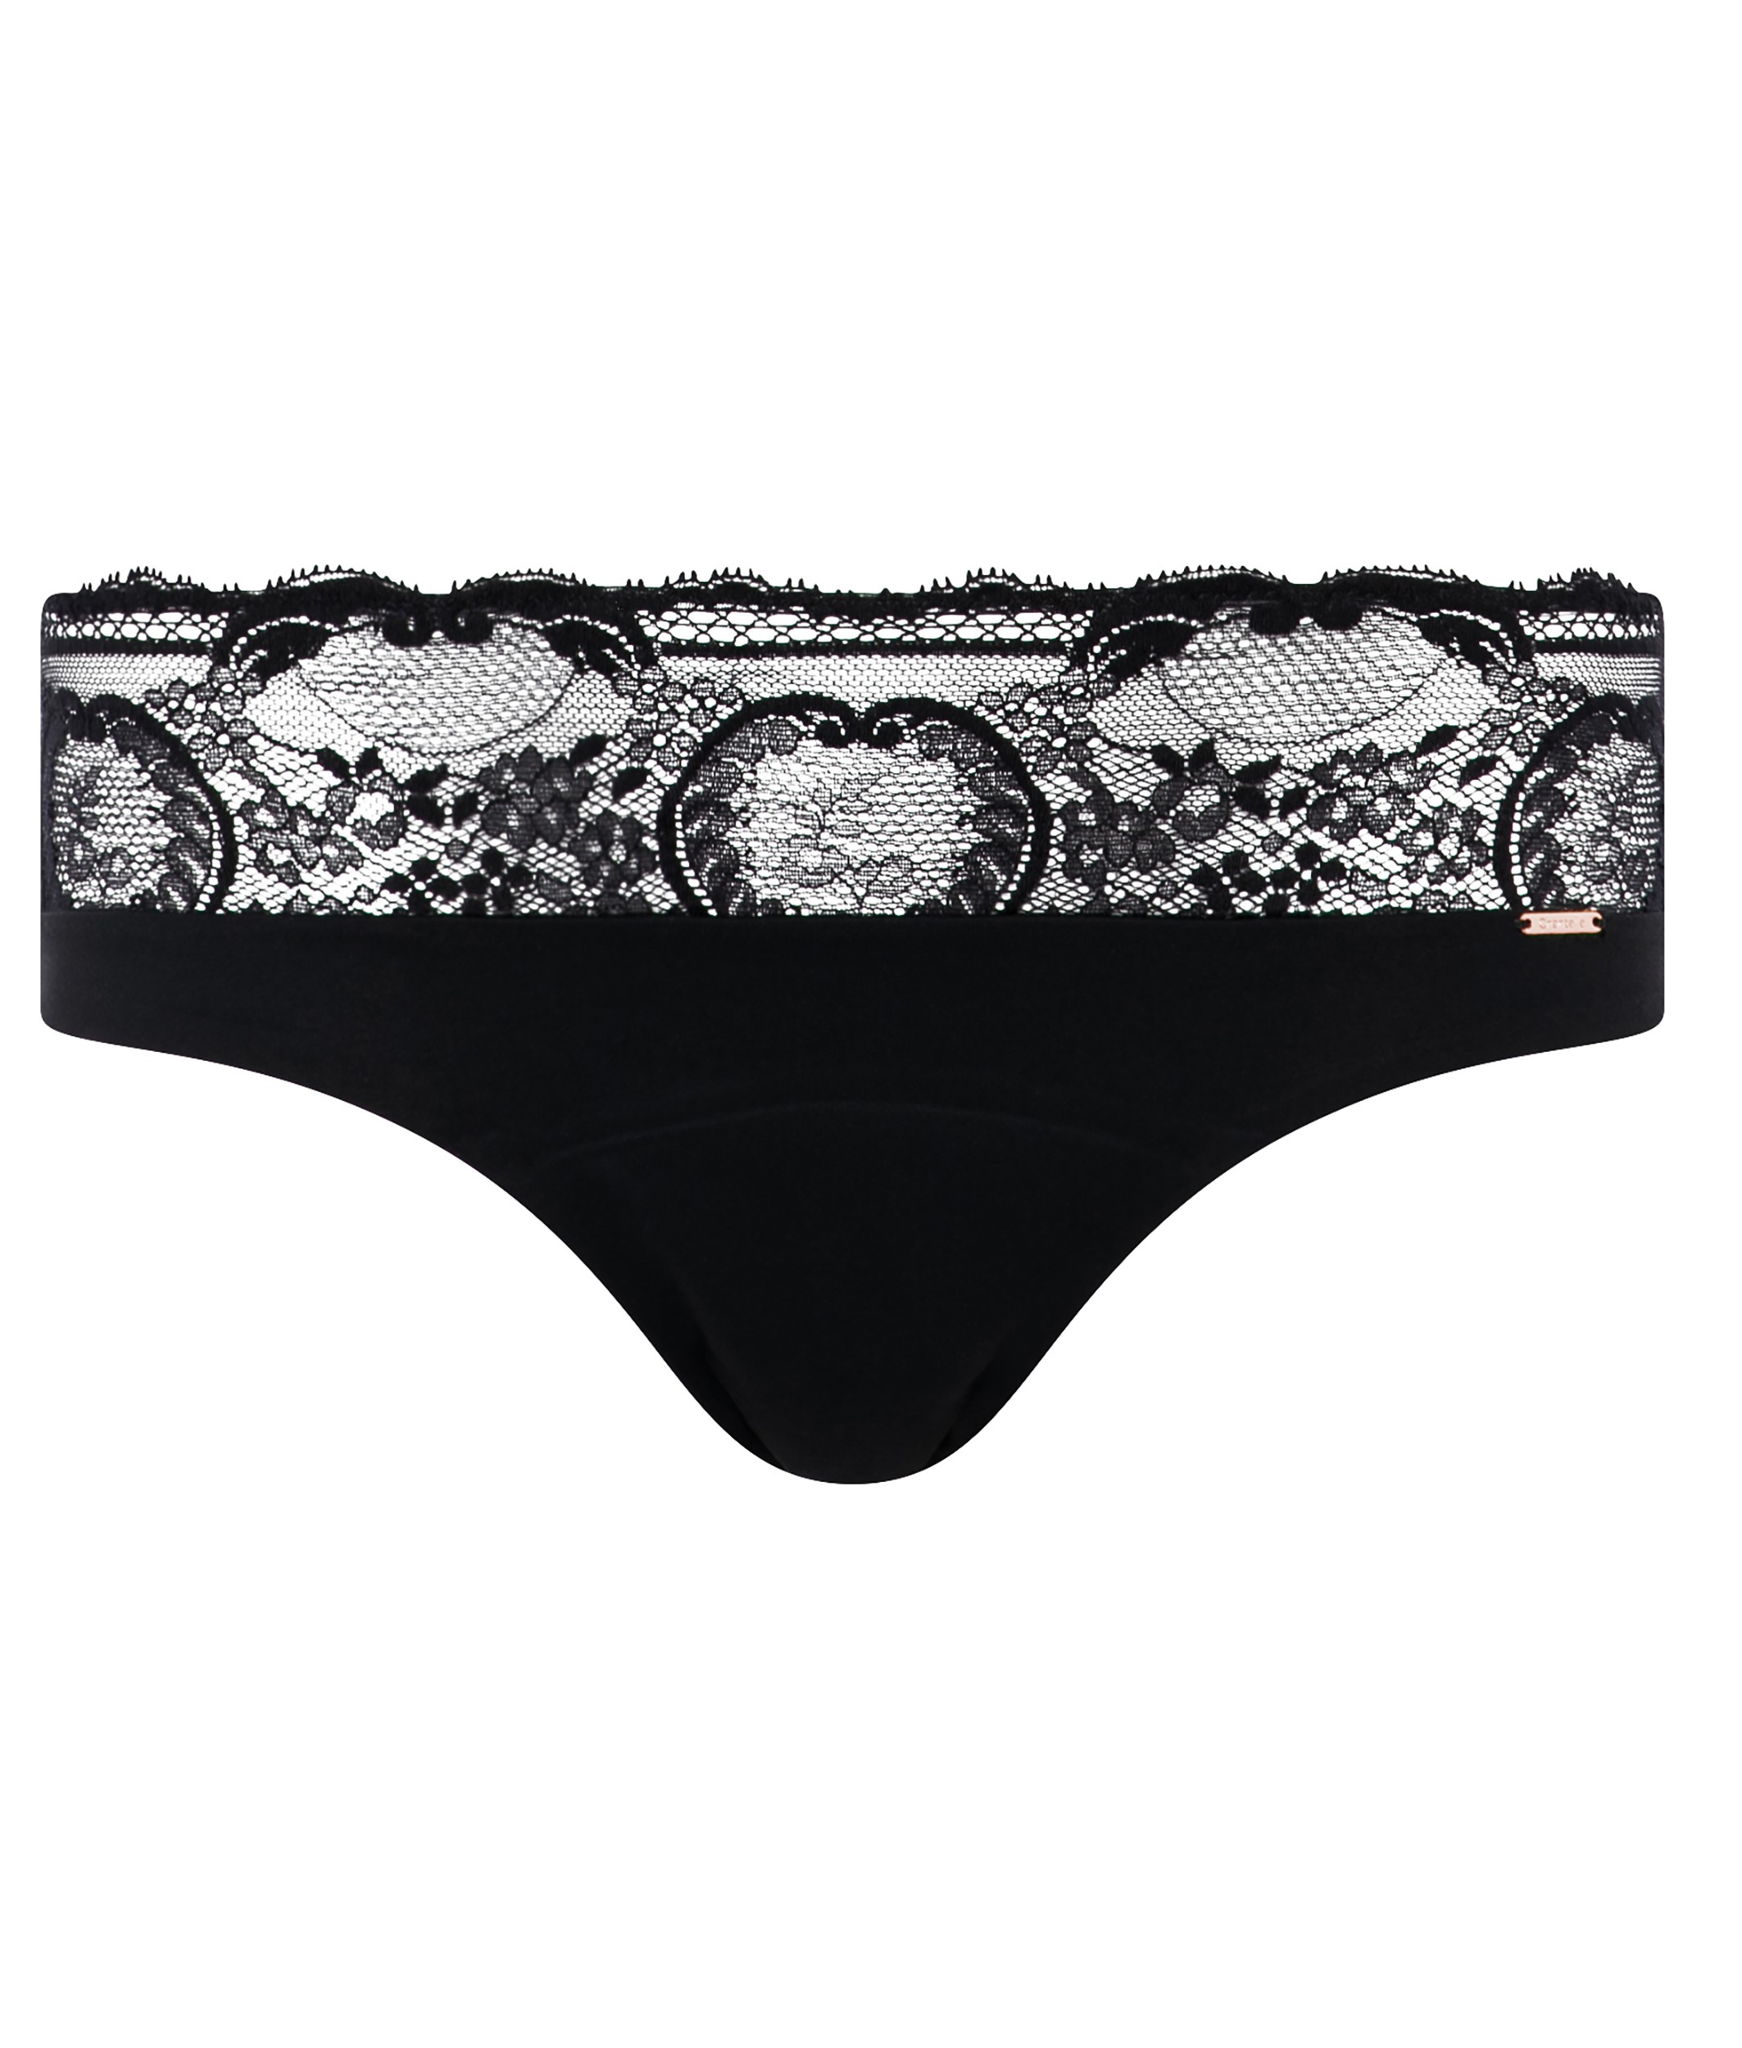 Chantelle Innovation: launching the Period Panty